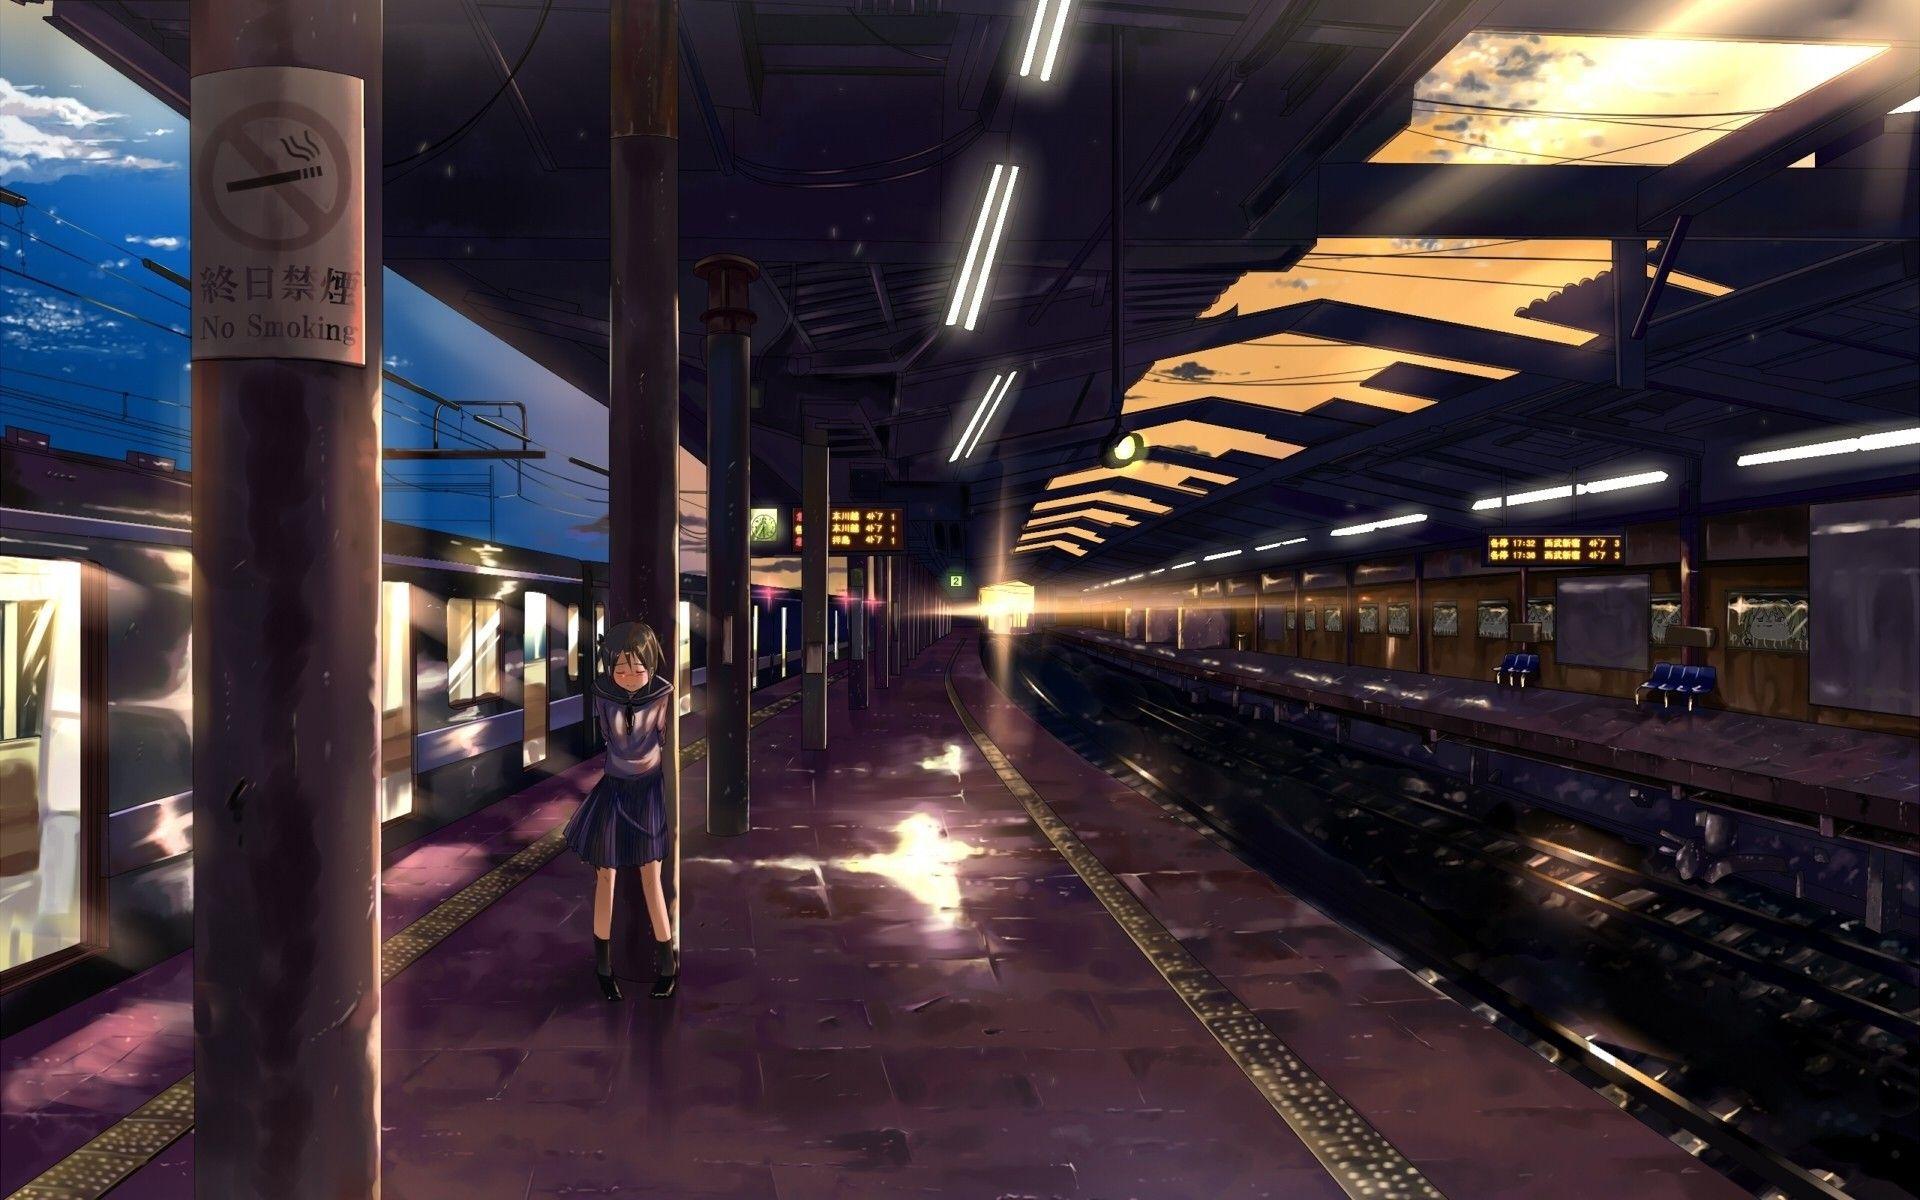 Mobile wallpaper Anime Sunset Train Station Original 994157 download  the picture for free